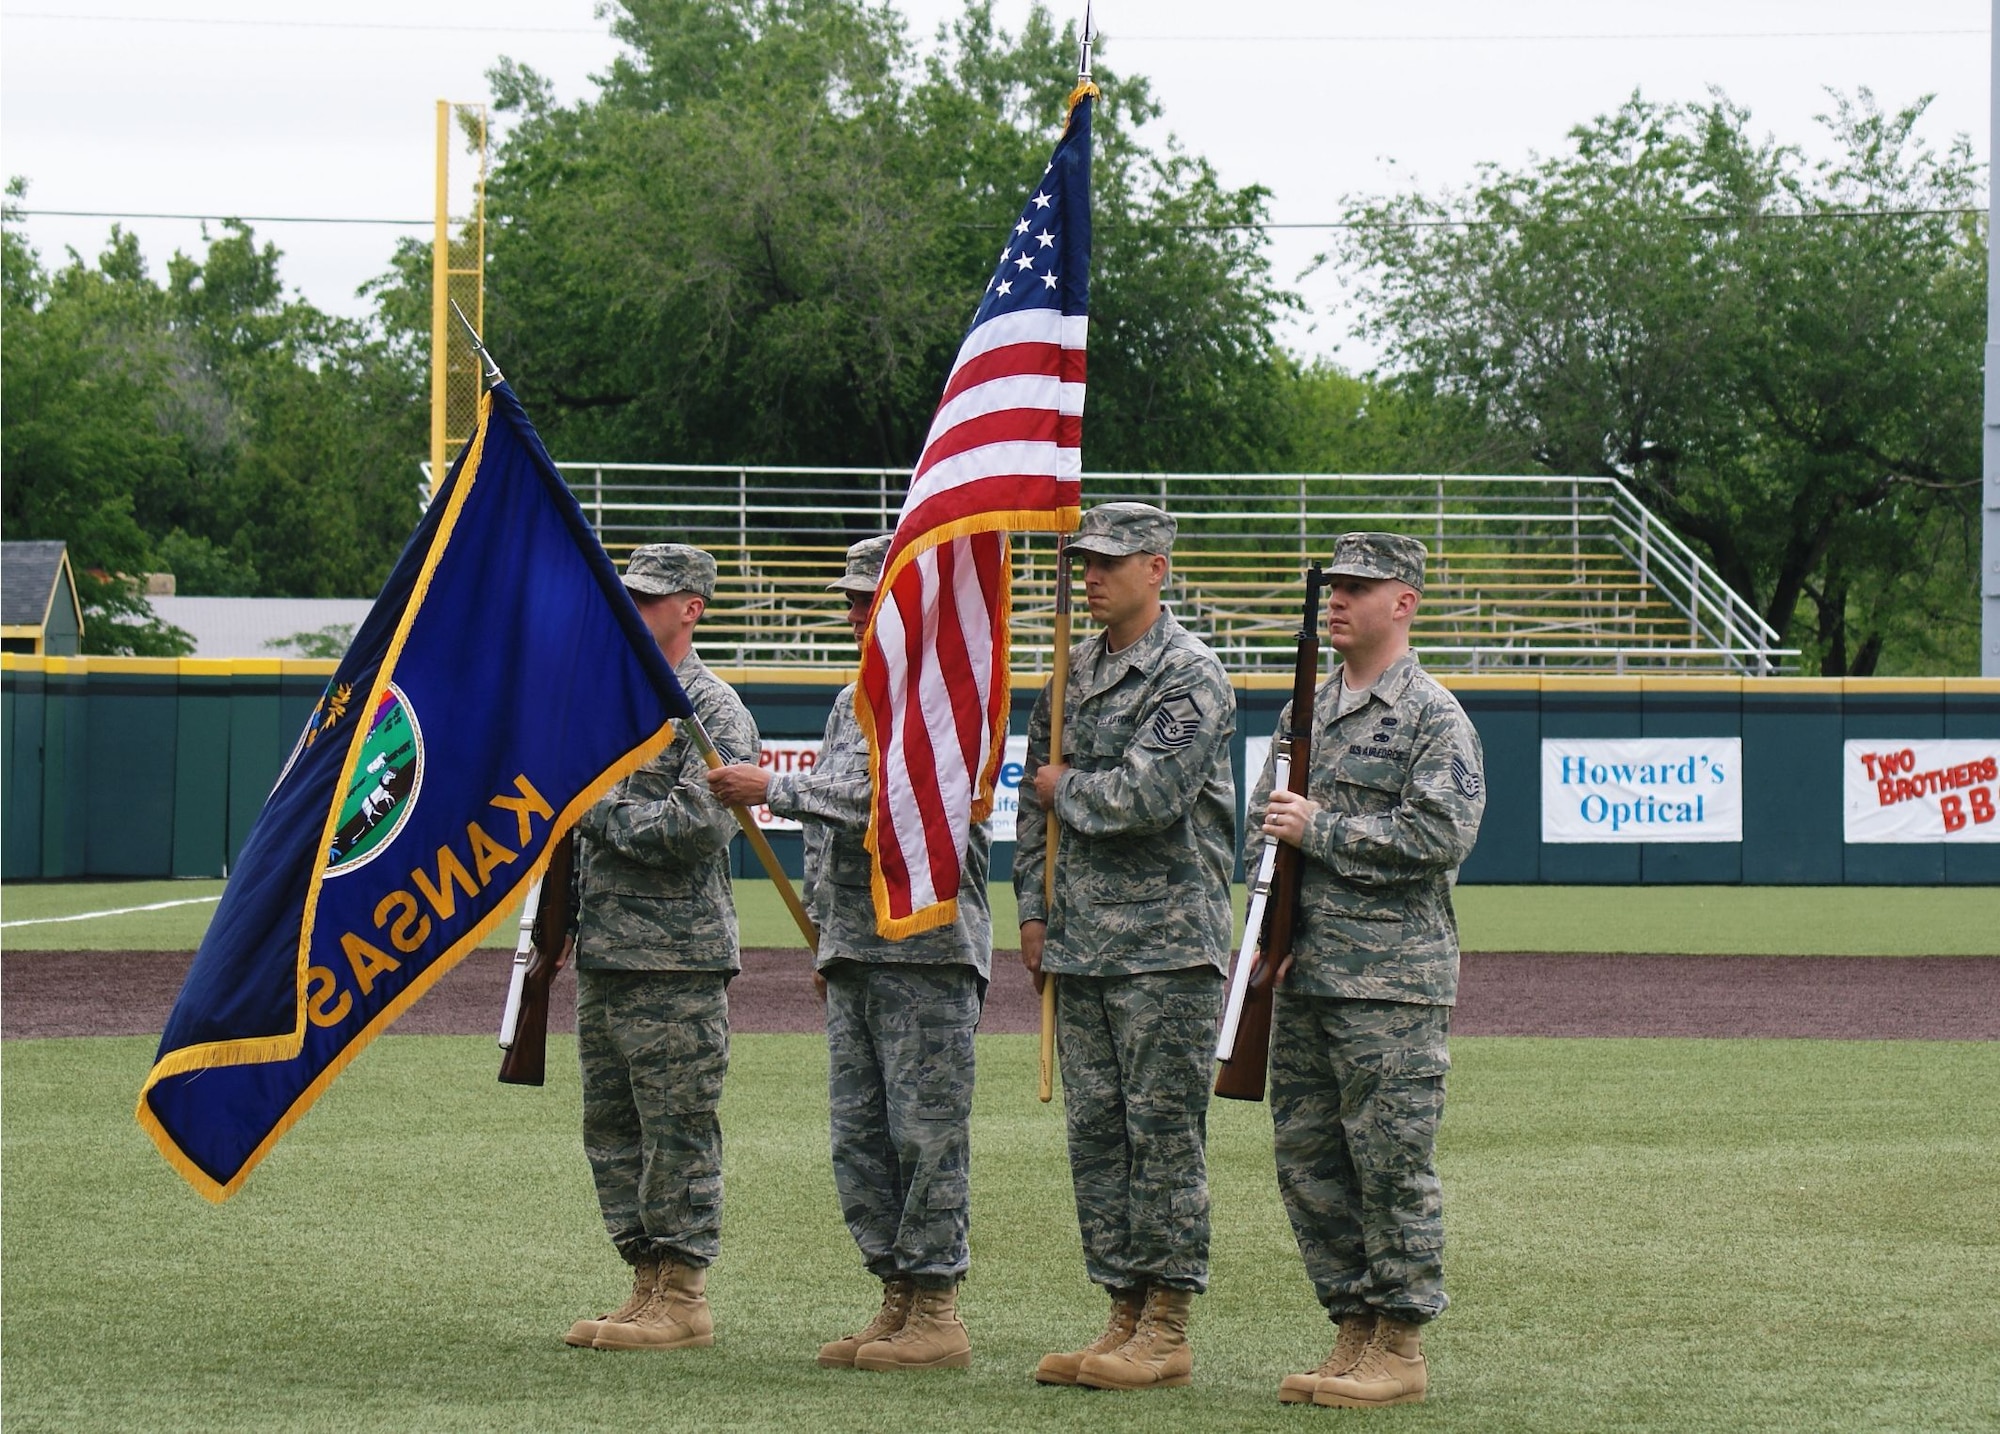 The 184th Intelligence Wing was out in force at the WSU Baseball's Military
Appreciation Day ballgame on May 15th.  The 134th Air Control Squadron
provided vehicle displays for fans at the main entrance to WSU's  Eck
Stadium. In addition, 184th Honor Guard (SMSgt Angstadt, MSgt Gardinier,
SSgt Keith Melvin, SSgt Anthony Garner) kicked the day off by posting the
colors for the playing of the National Anthem.  

